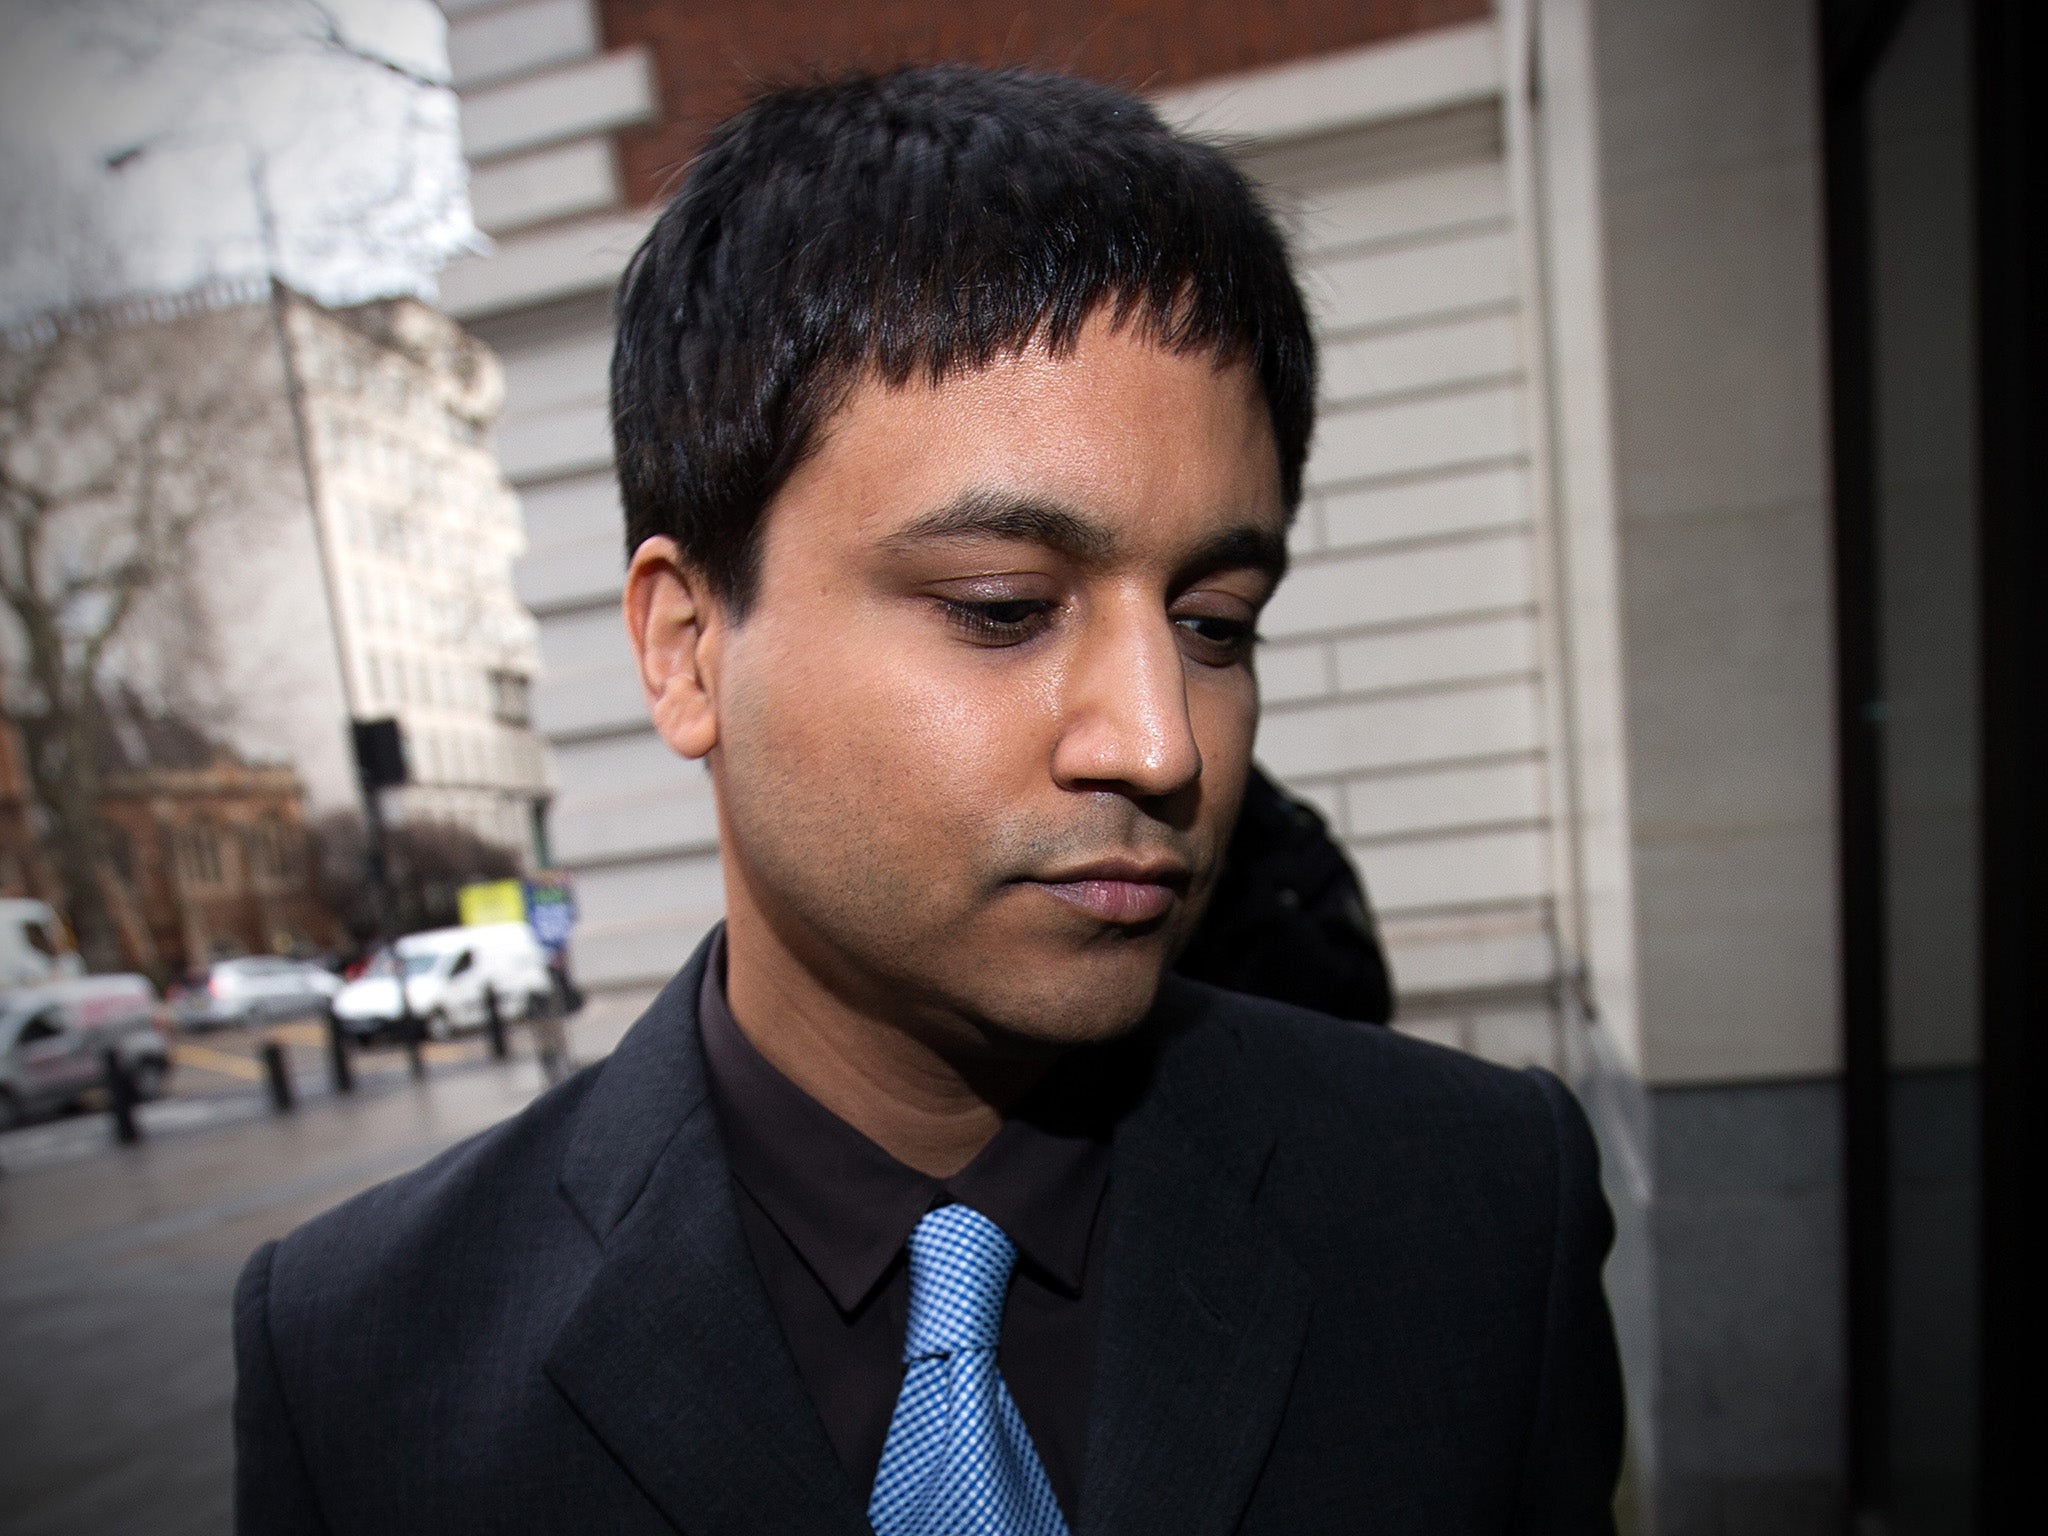 Navinder Singh Sarao, the British stock market trader accused of contributing to the 2010 flash crash, arrives at Westminster Magistrates Court